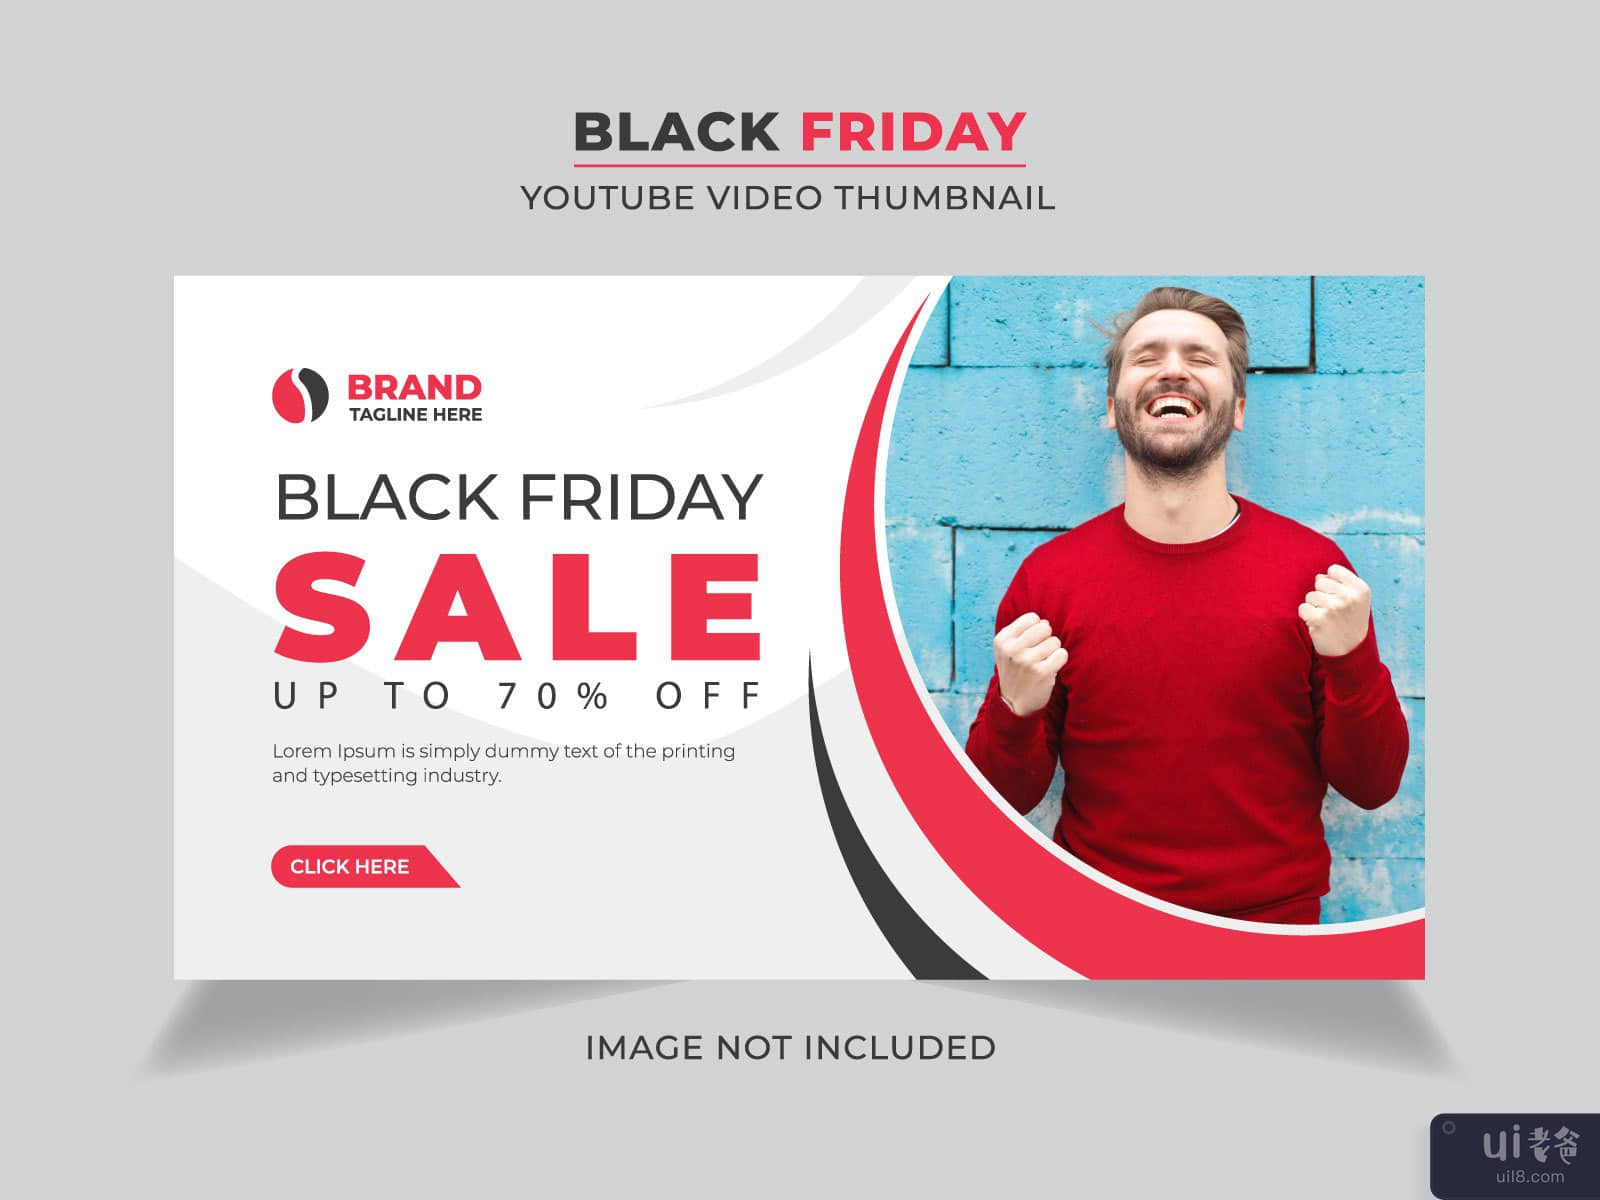 Black Friday Super Sale video thumbnail and web banner